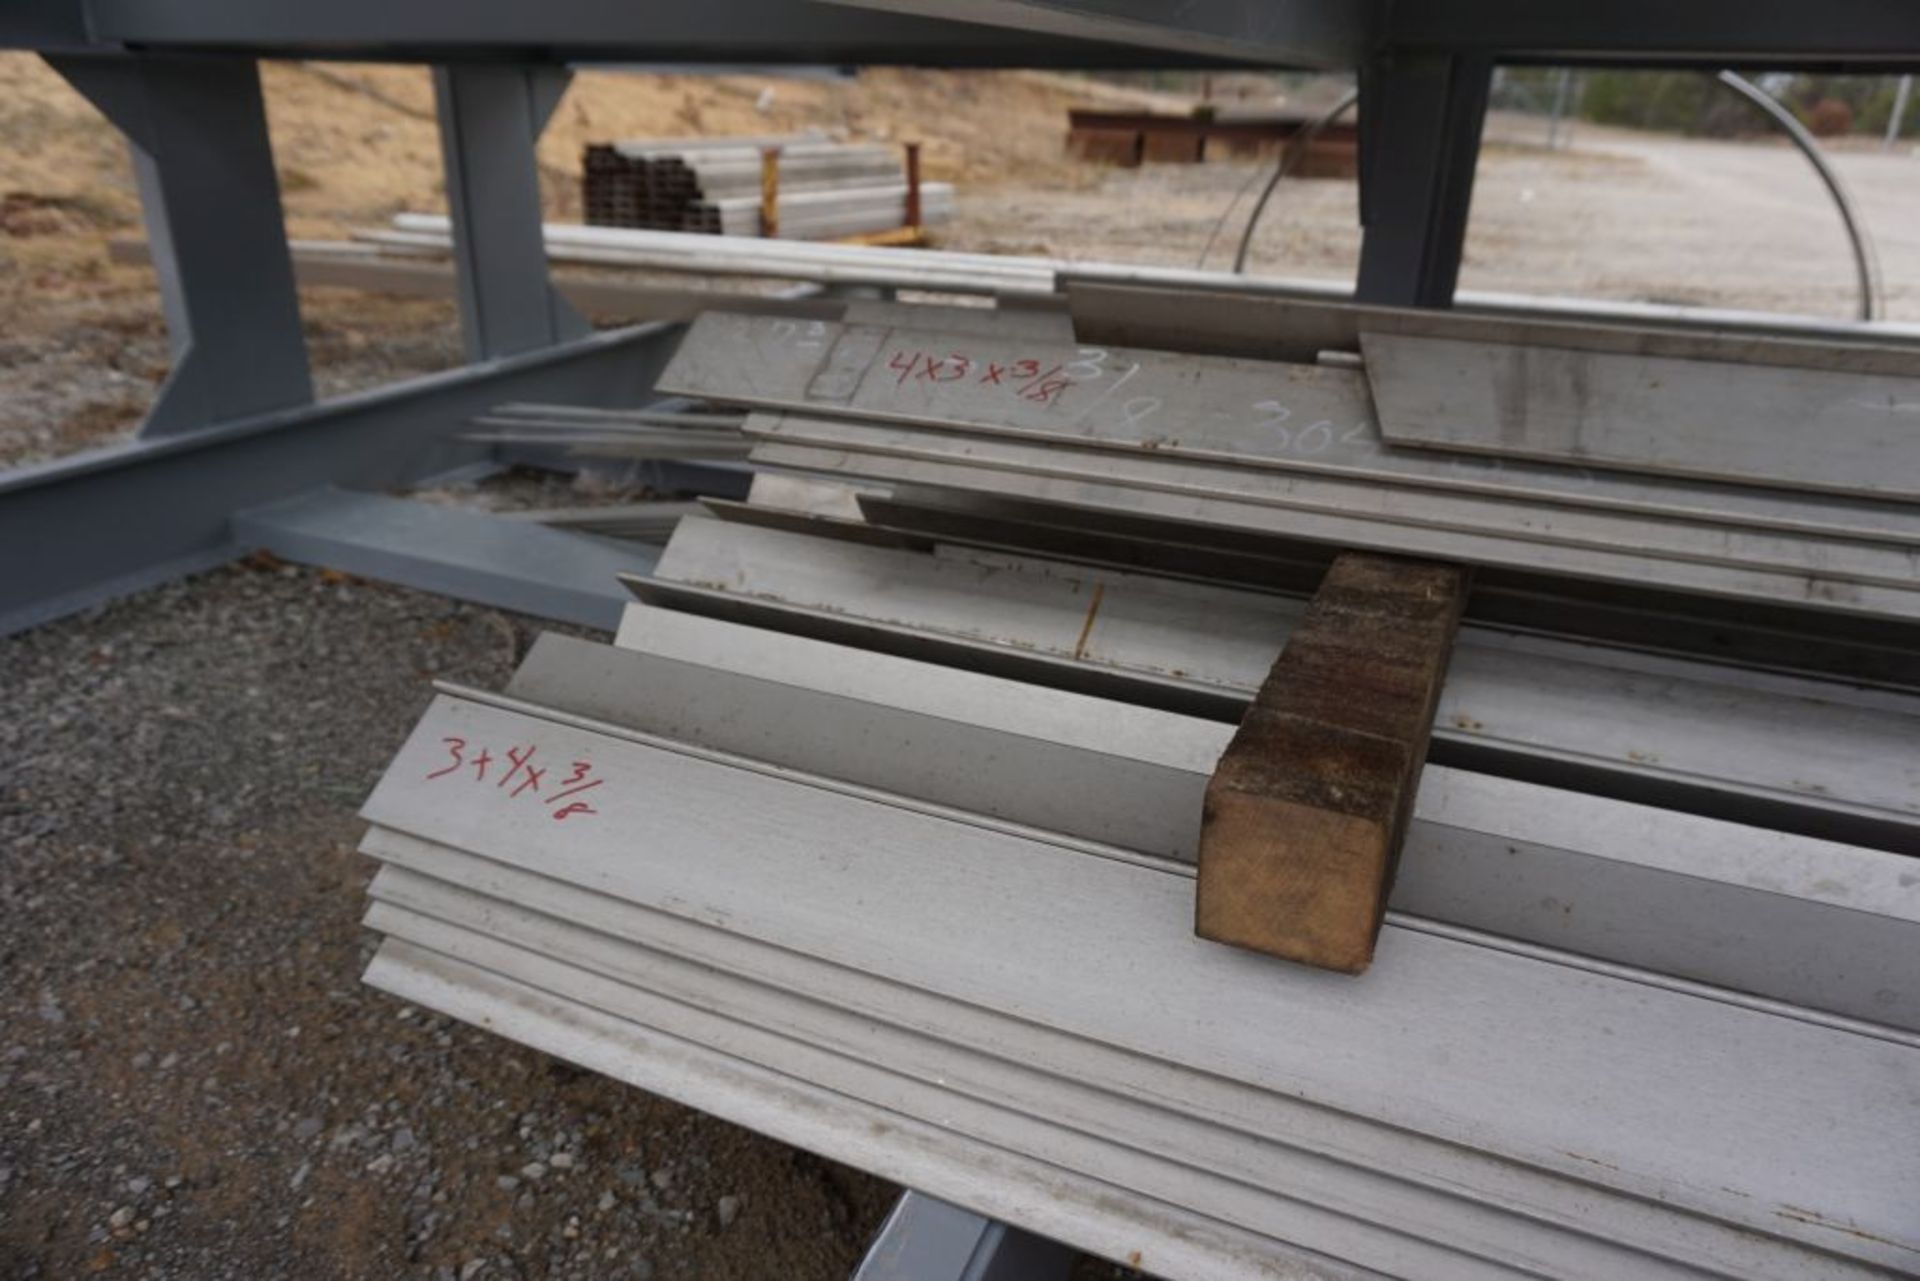 Rack of Assorted Stainless Steel Pipes & Bars - Image 14 of 46